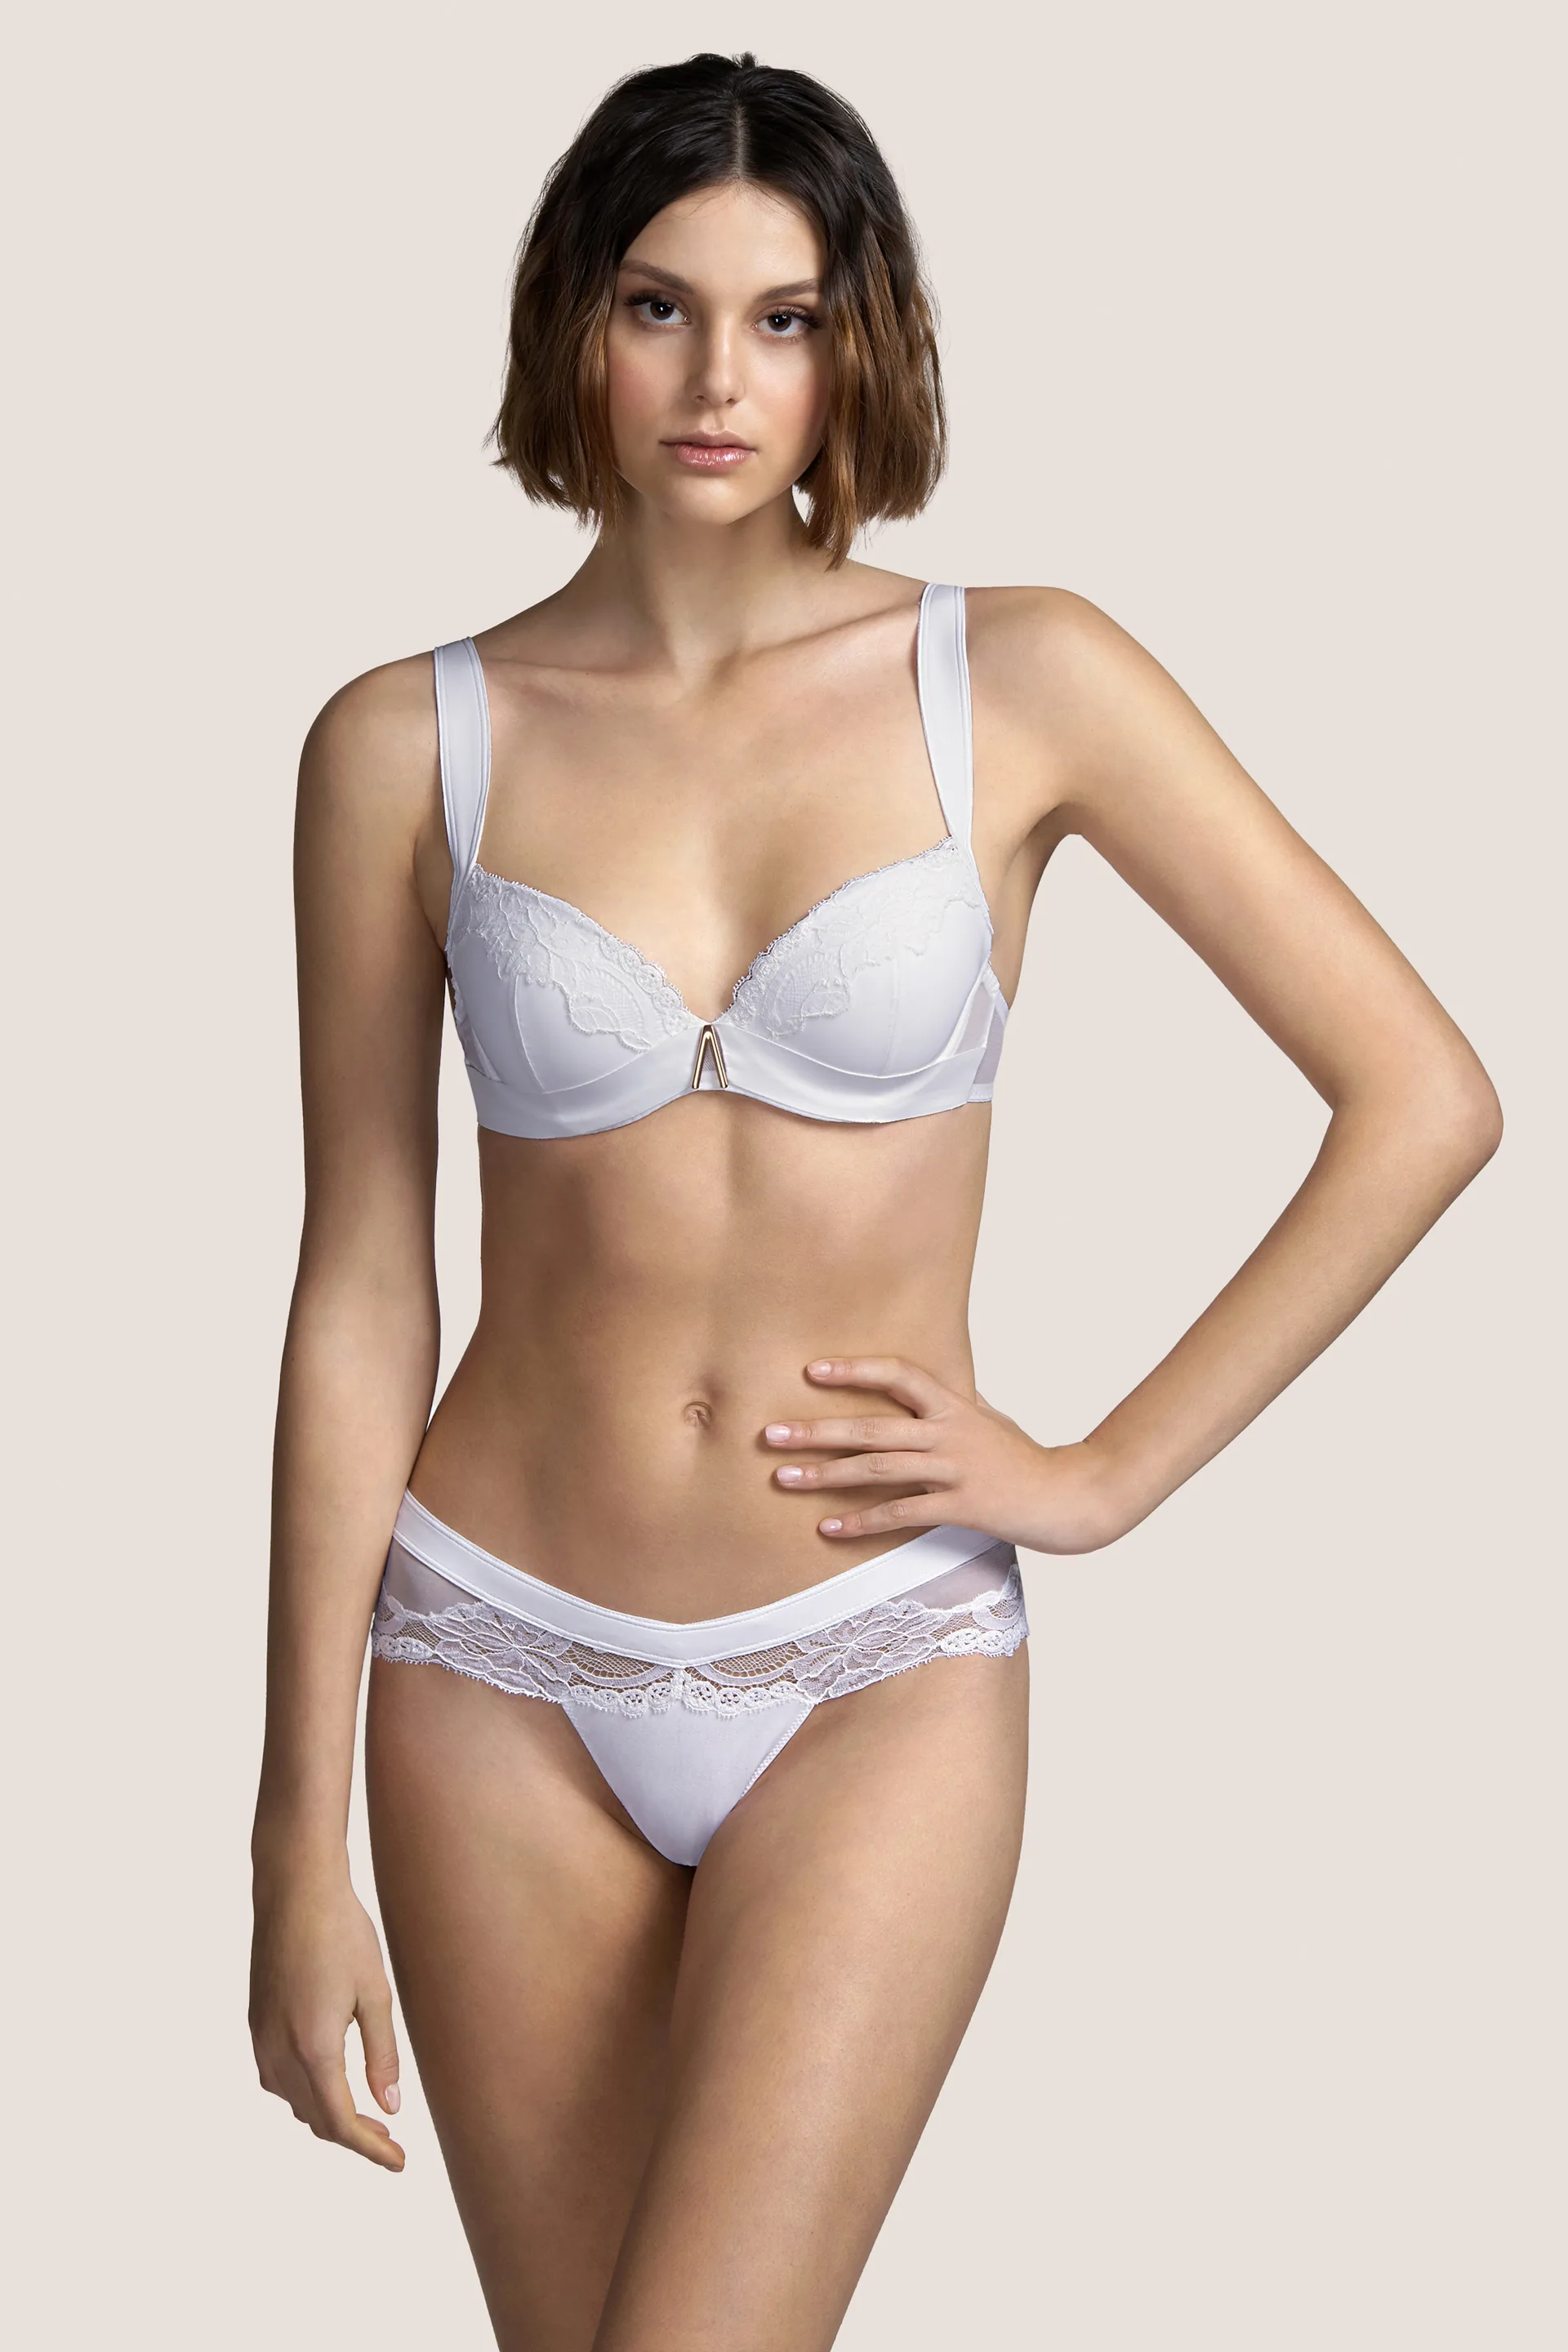 Andres Sarda JANIS make-up full cup bra wireless